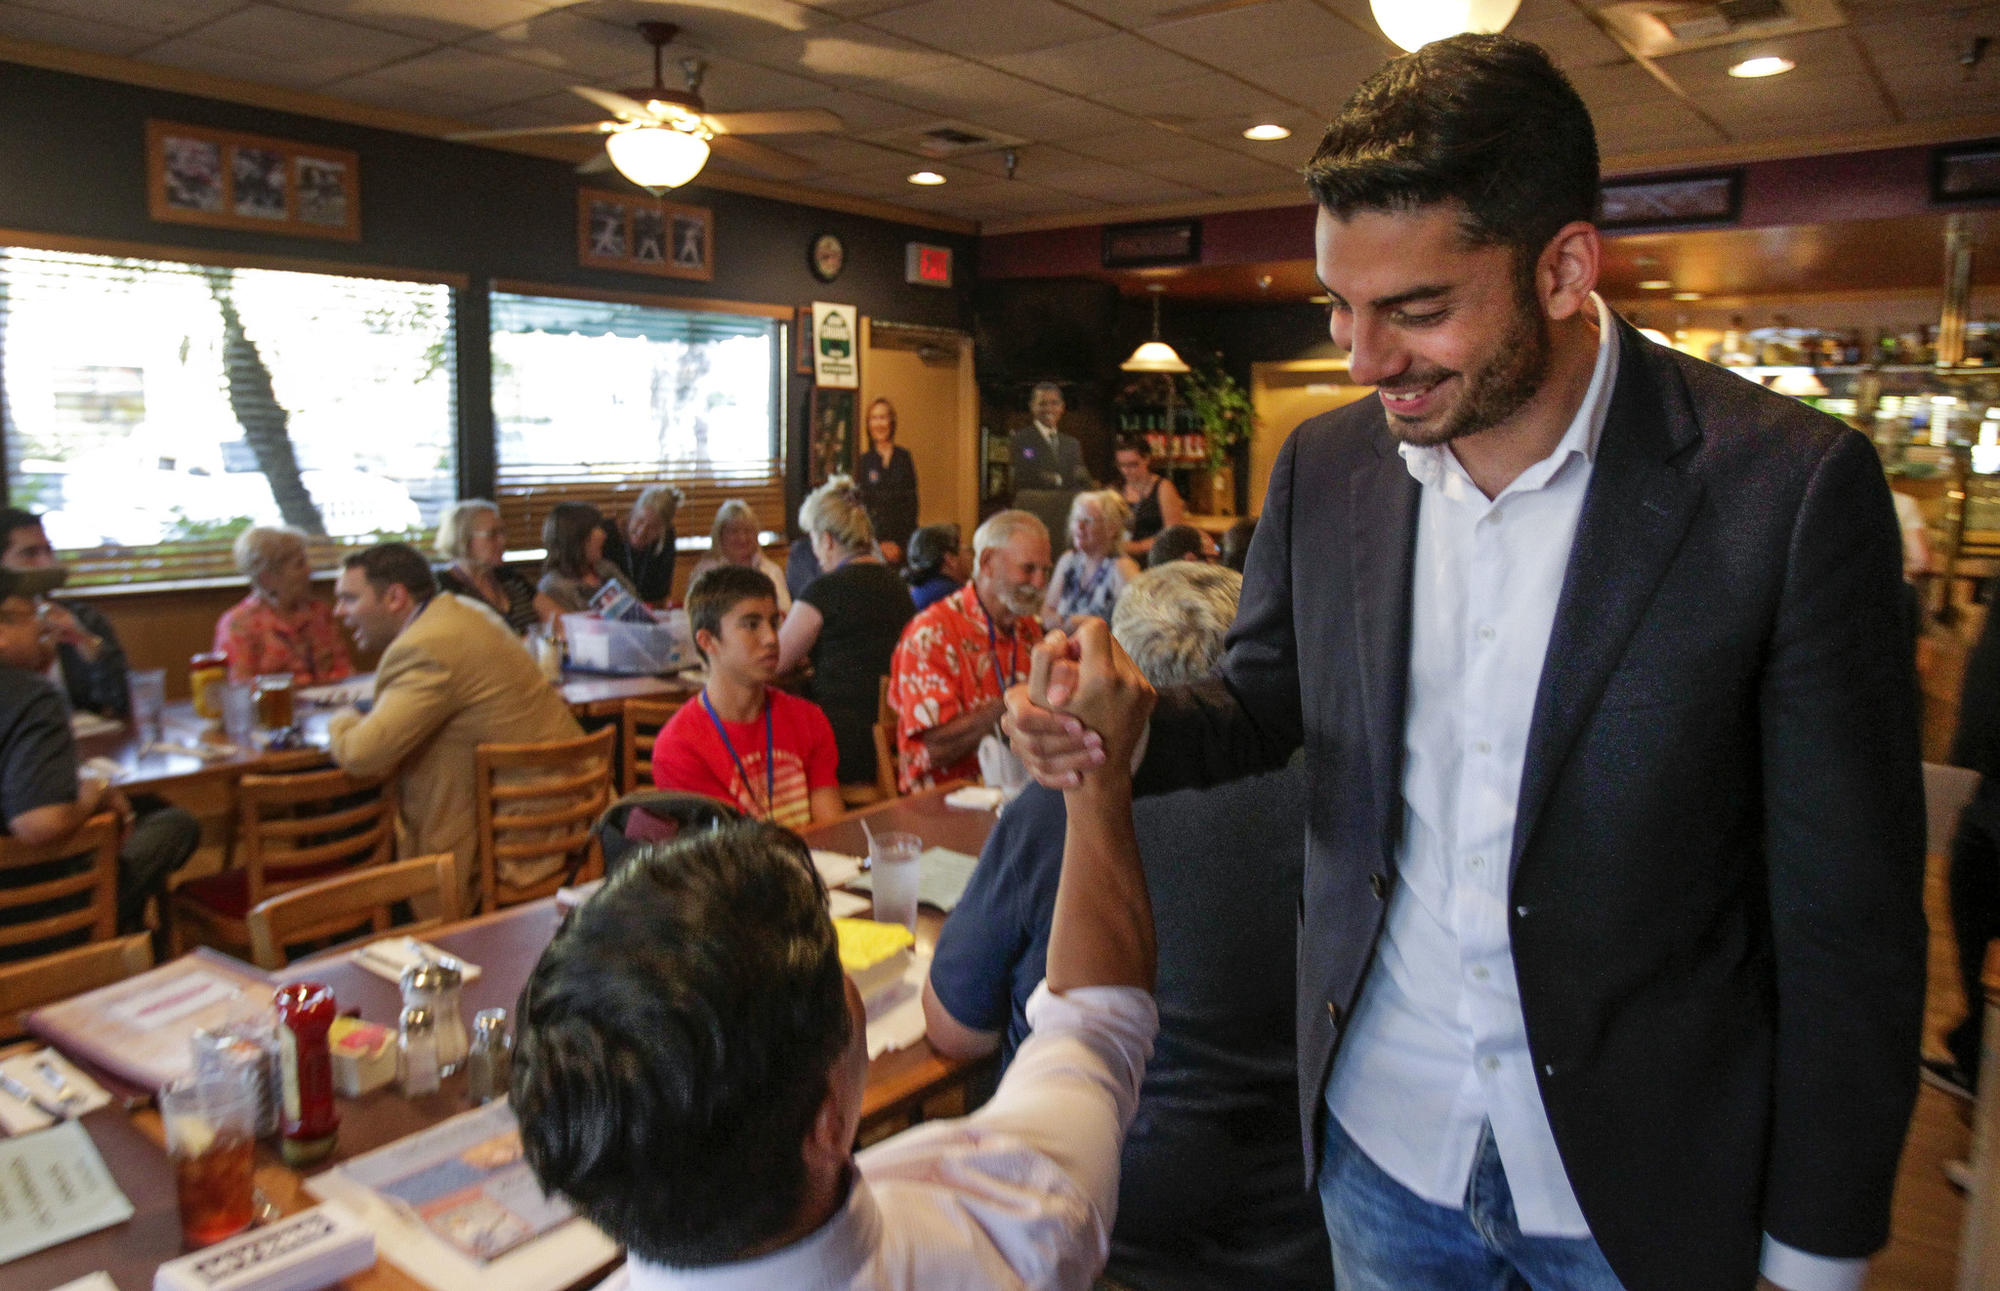 SANTEE, August 17, 2017 | Ammar Campa-Najjar, 28, a candidate for 50th congressional district, shake